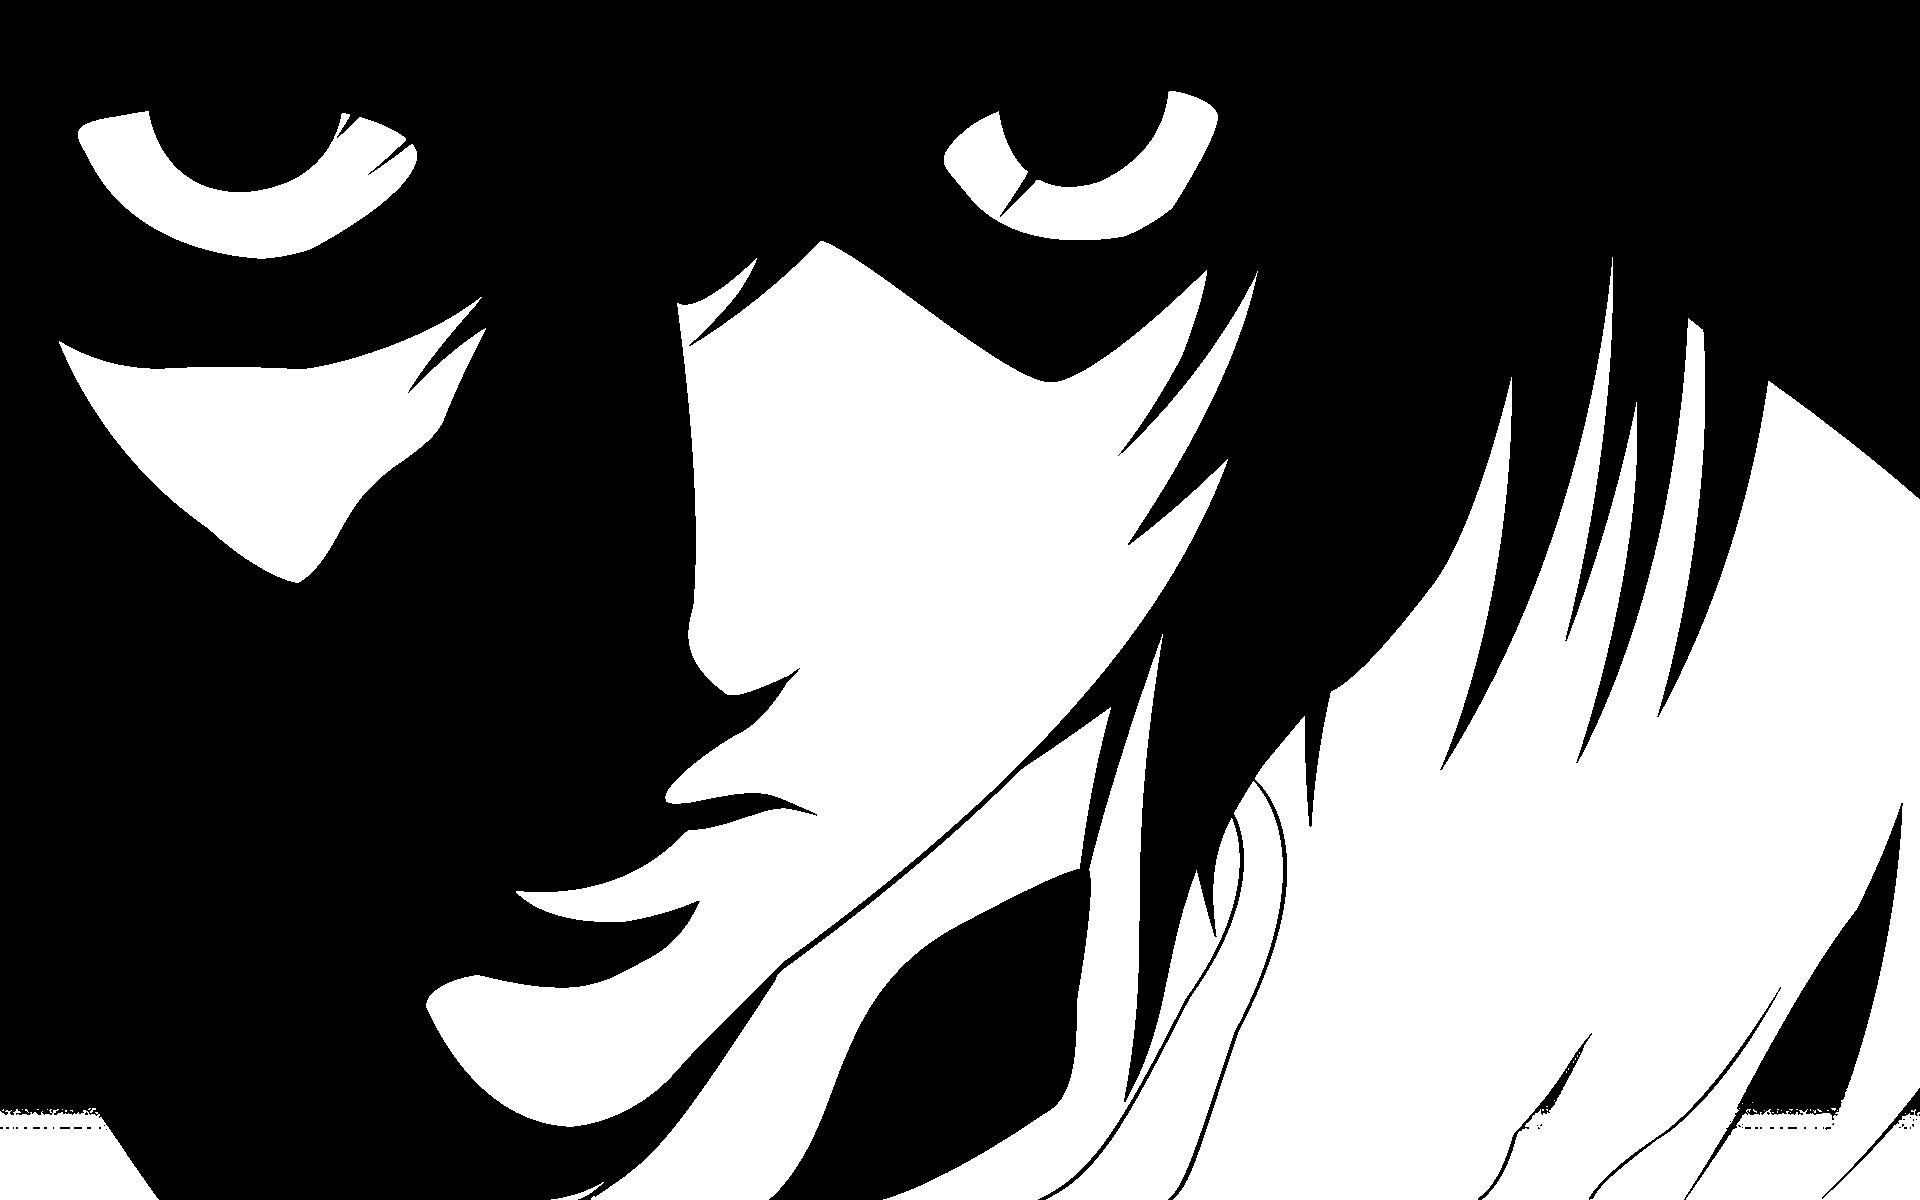 Death Note Image